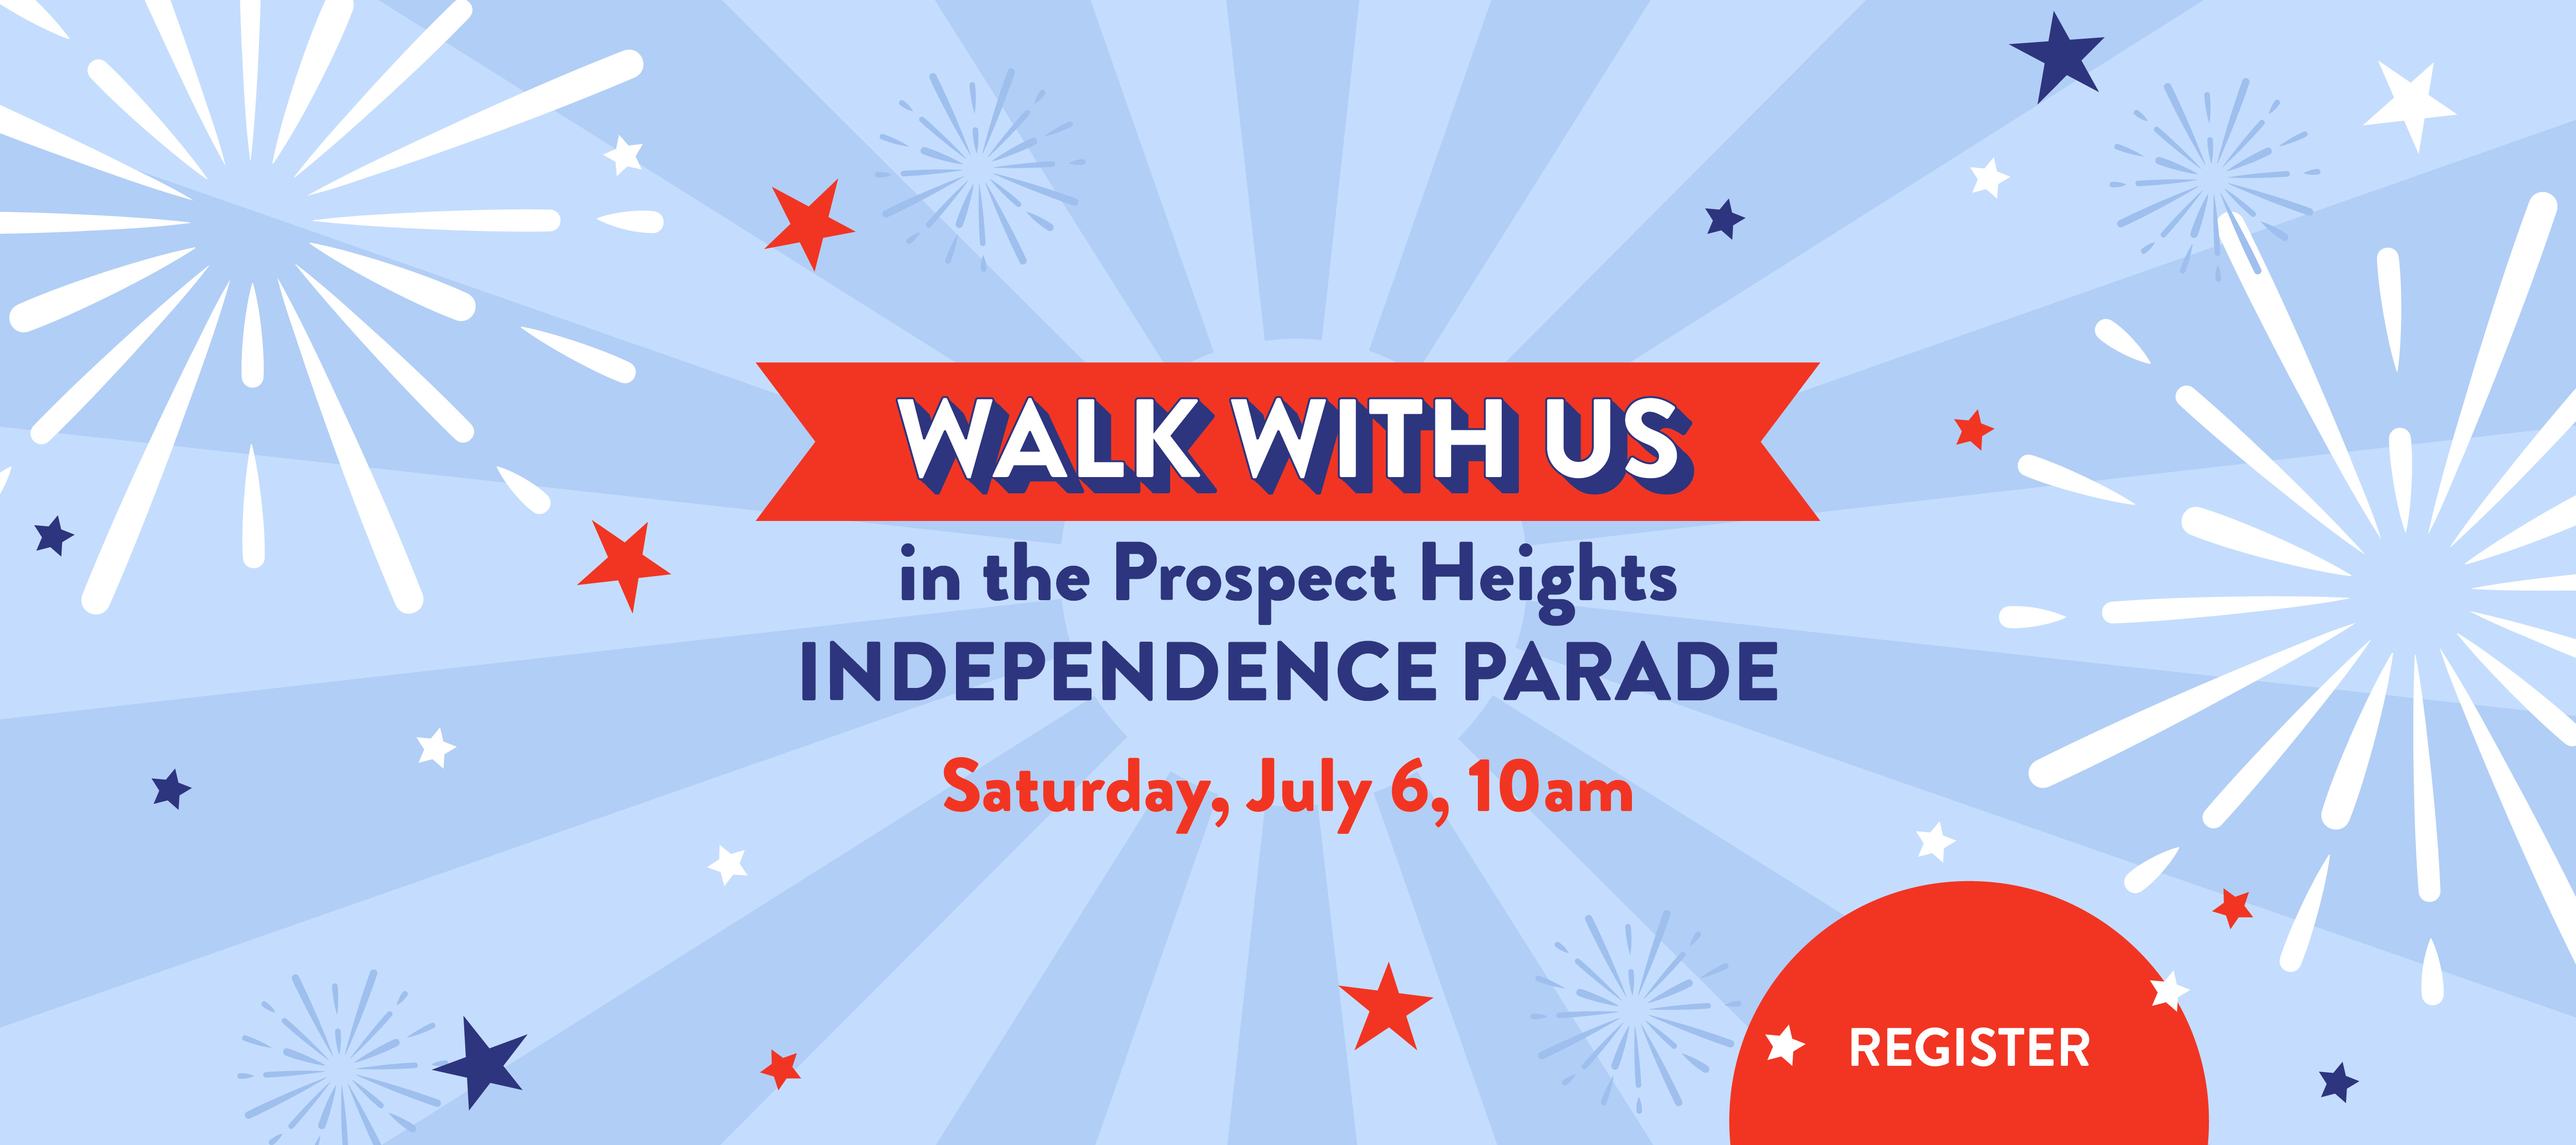 phpl, Prospect Heights Public Library, Walk With Us, Prospect Heights Independence Parade, 4th of July Parade, community gathering, celebrate, Youth, Teen, Adult